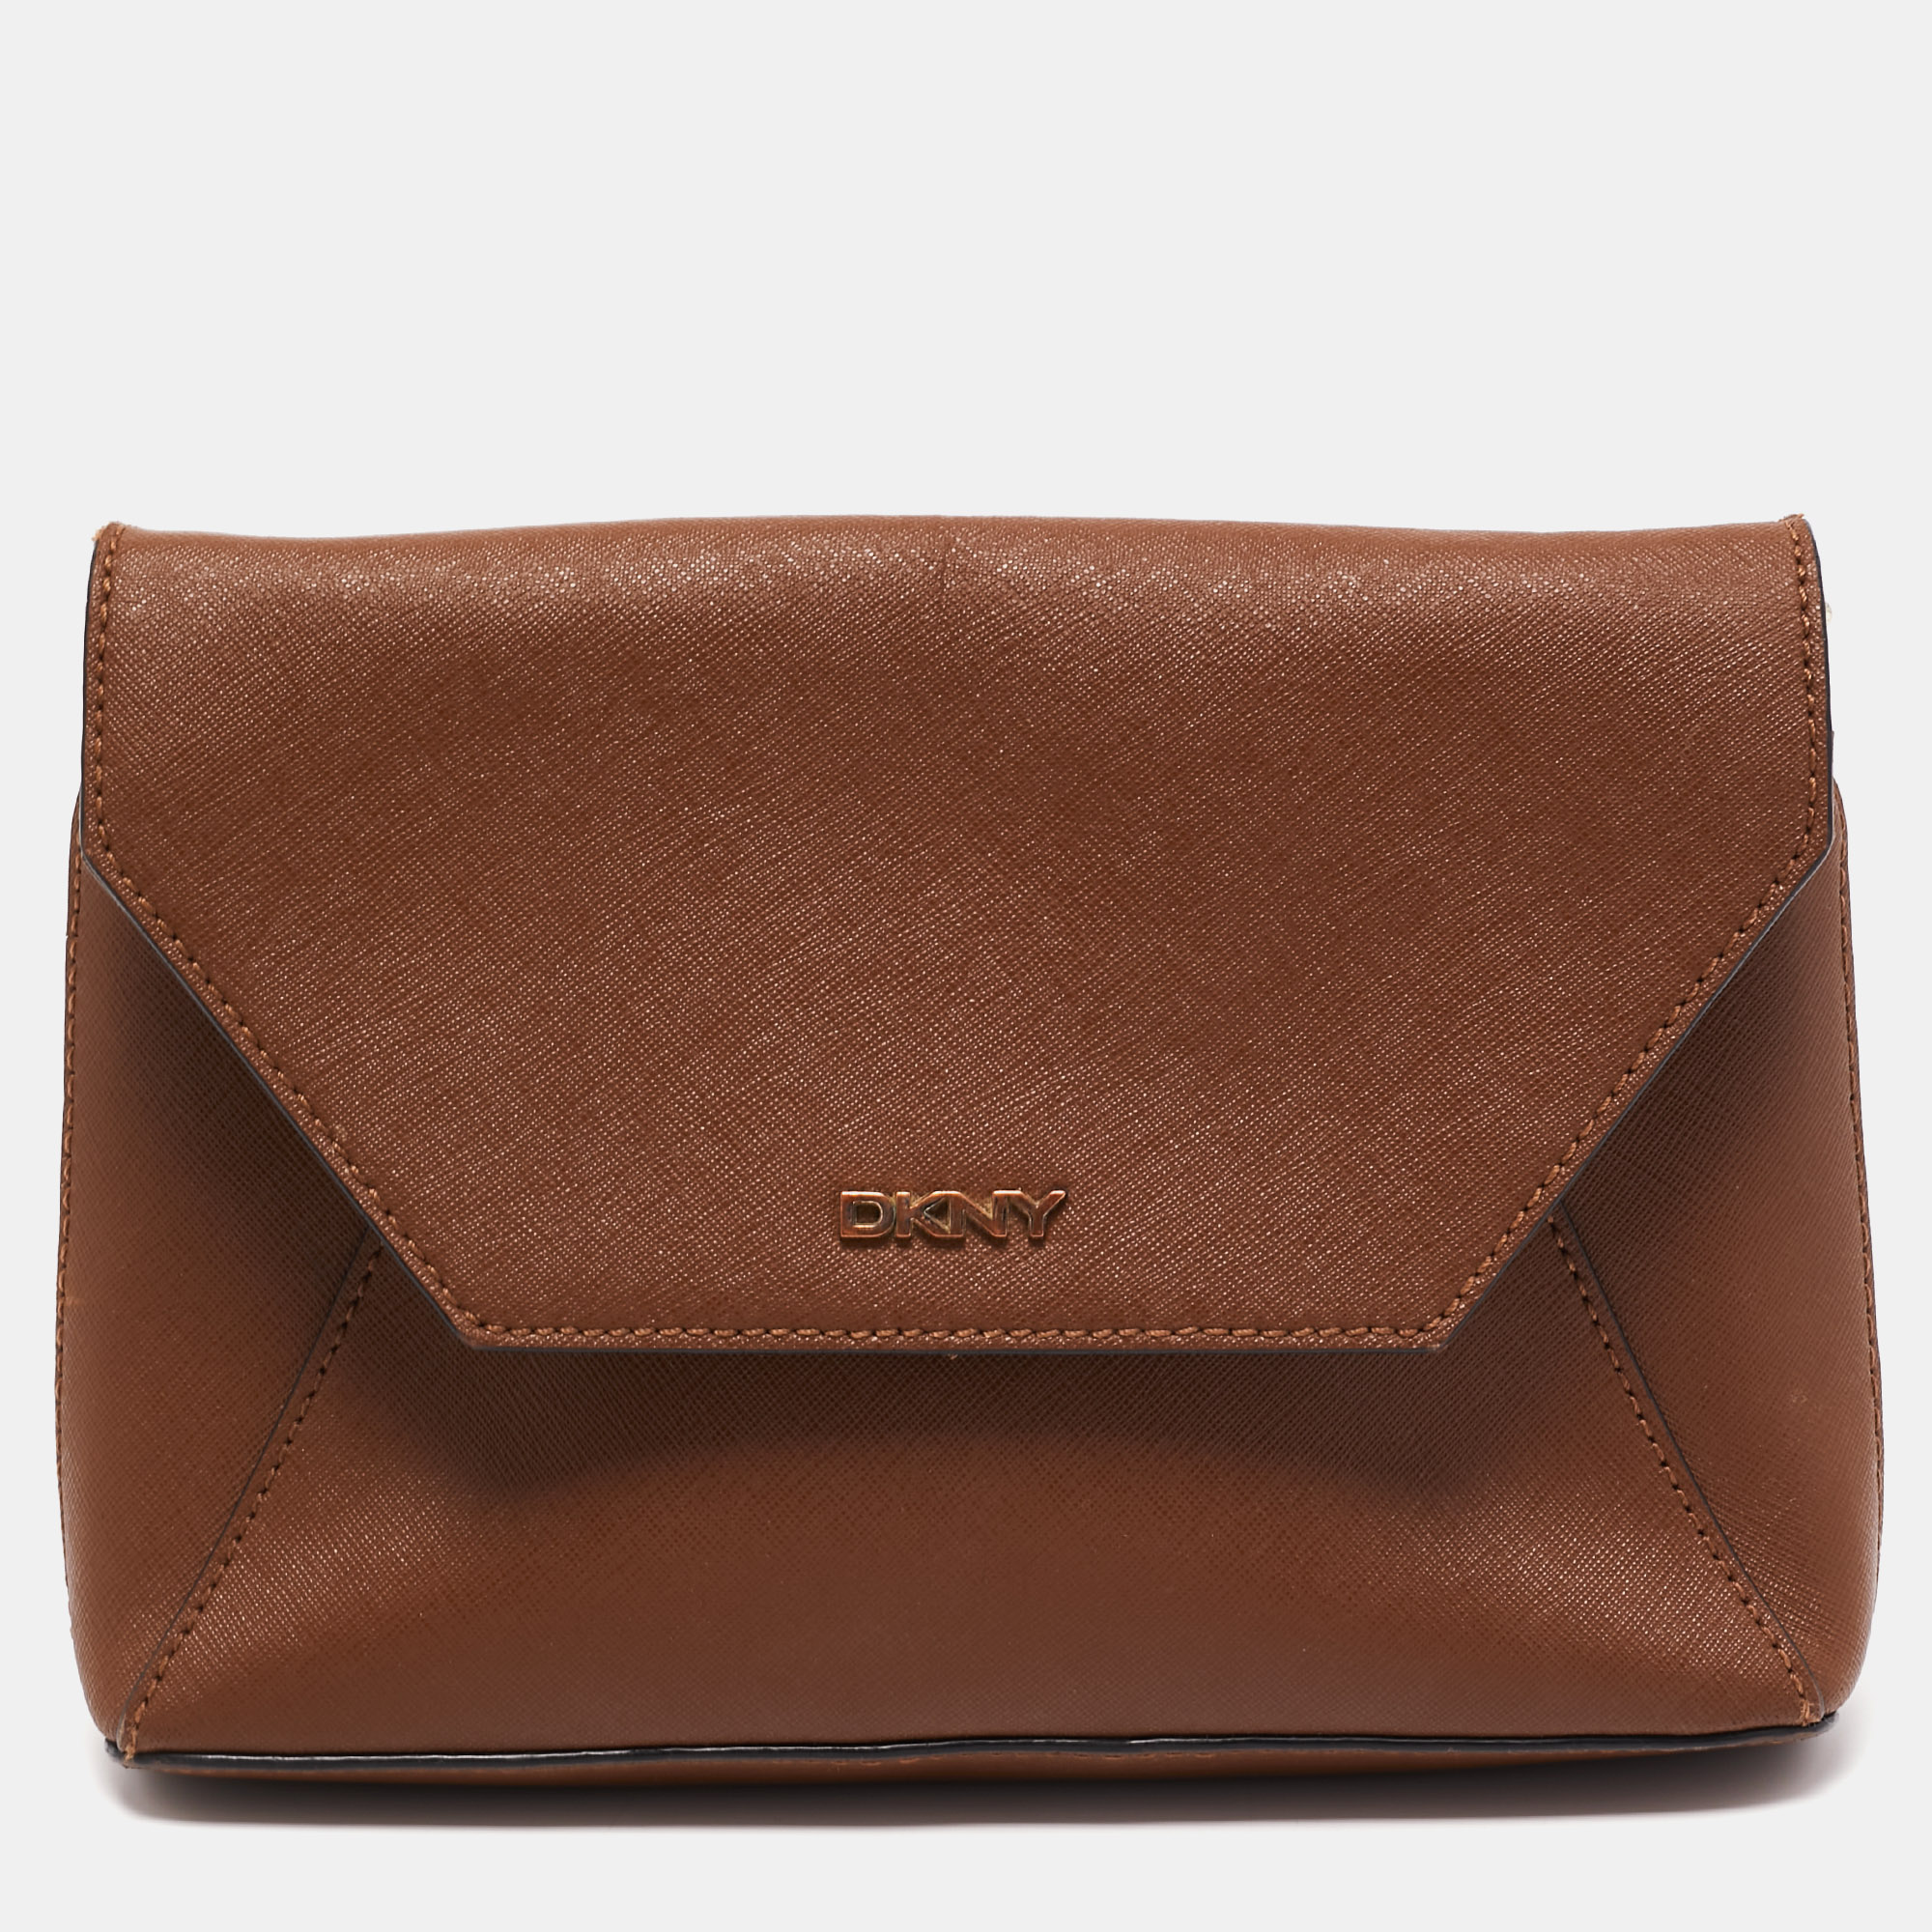 Pre-owned Dkny Brown Leather Envelope Strap Pouch